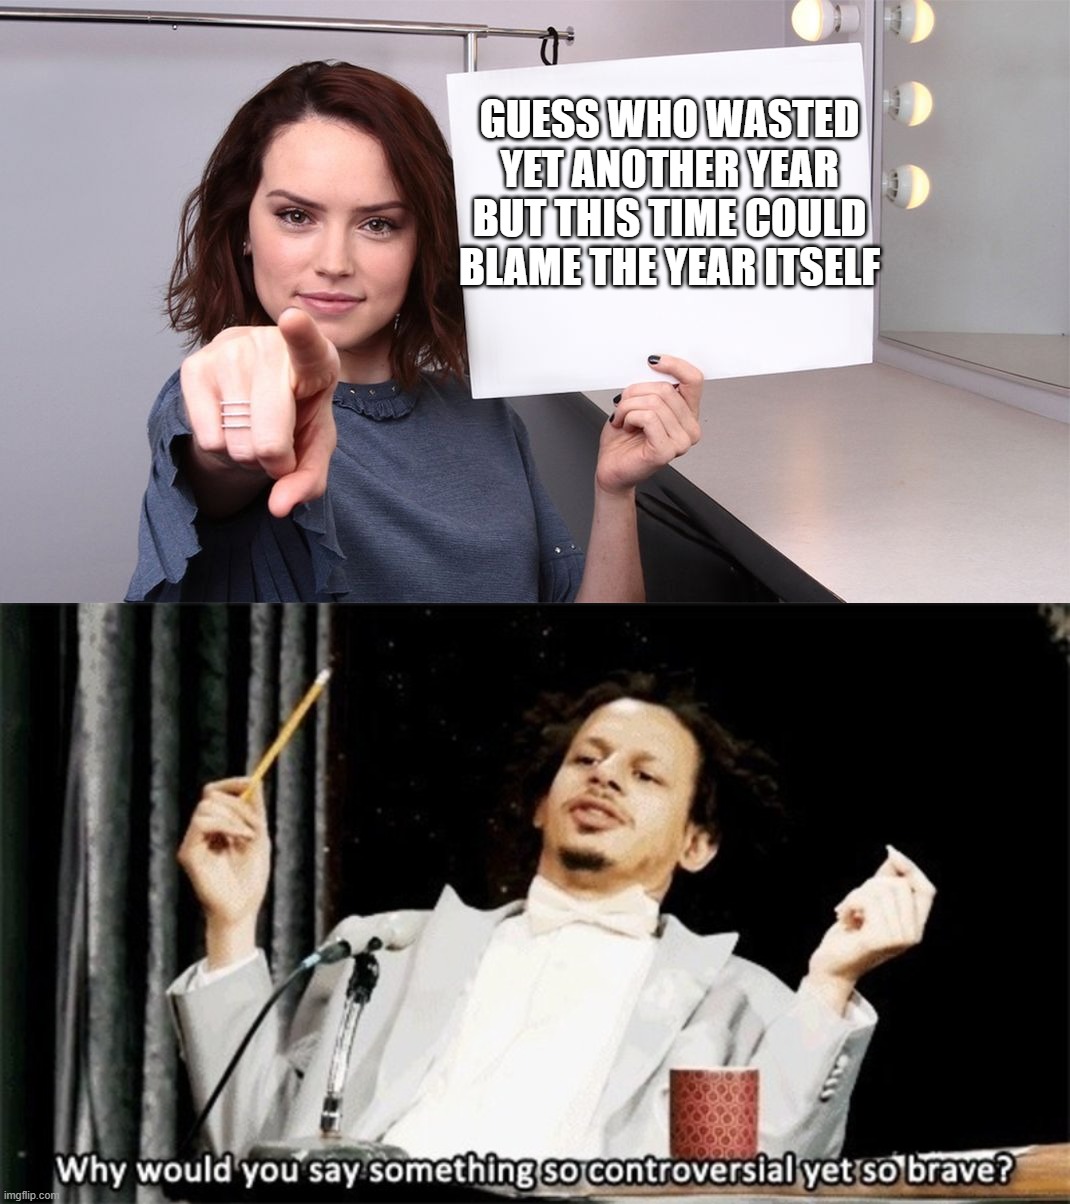 Personal attack - "yes" [2020] |  GUESS WHO WASTED YET ANOTHER YEAR BUT THIS TIME COULD BLAME THE YEAR ITSELF | image tagged in daisy ridley,why would you say something so controversial yet so brave,memes,funny memes,lol,2020 | made w/ Imgflip meme maker